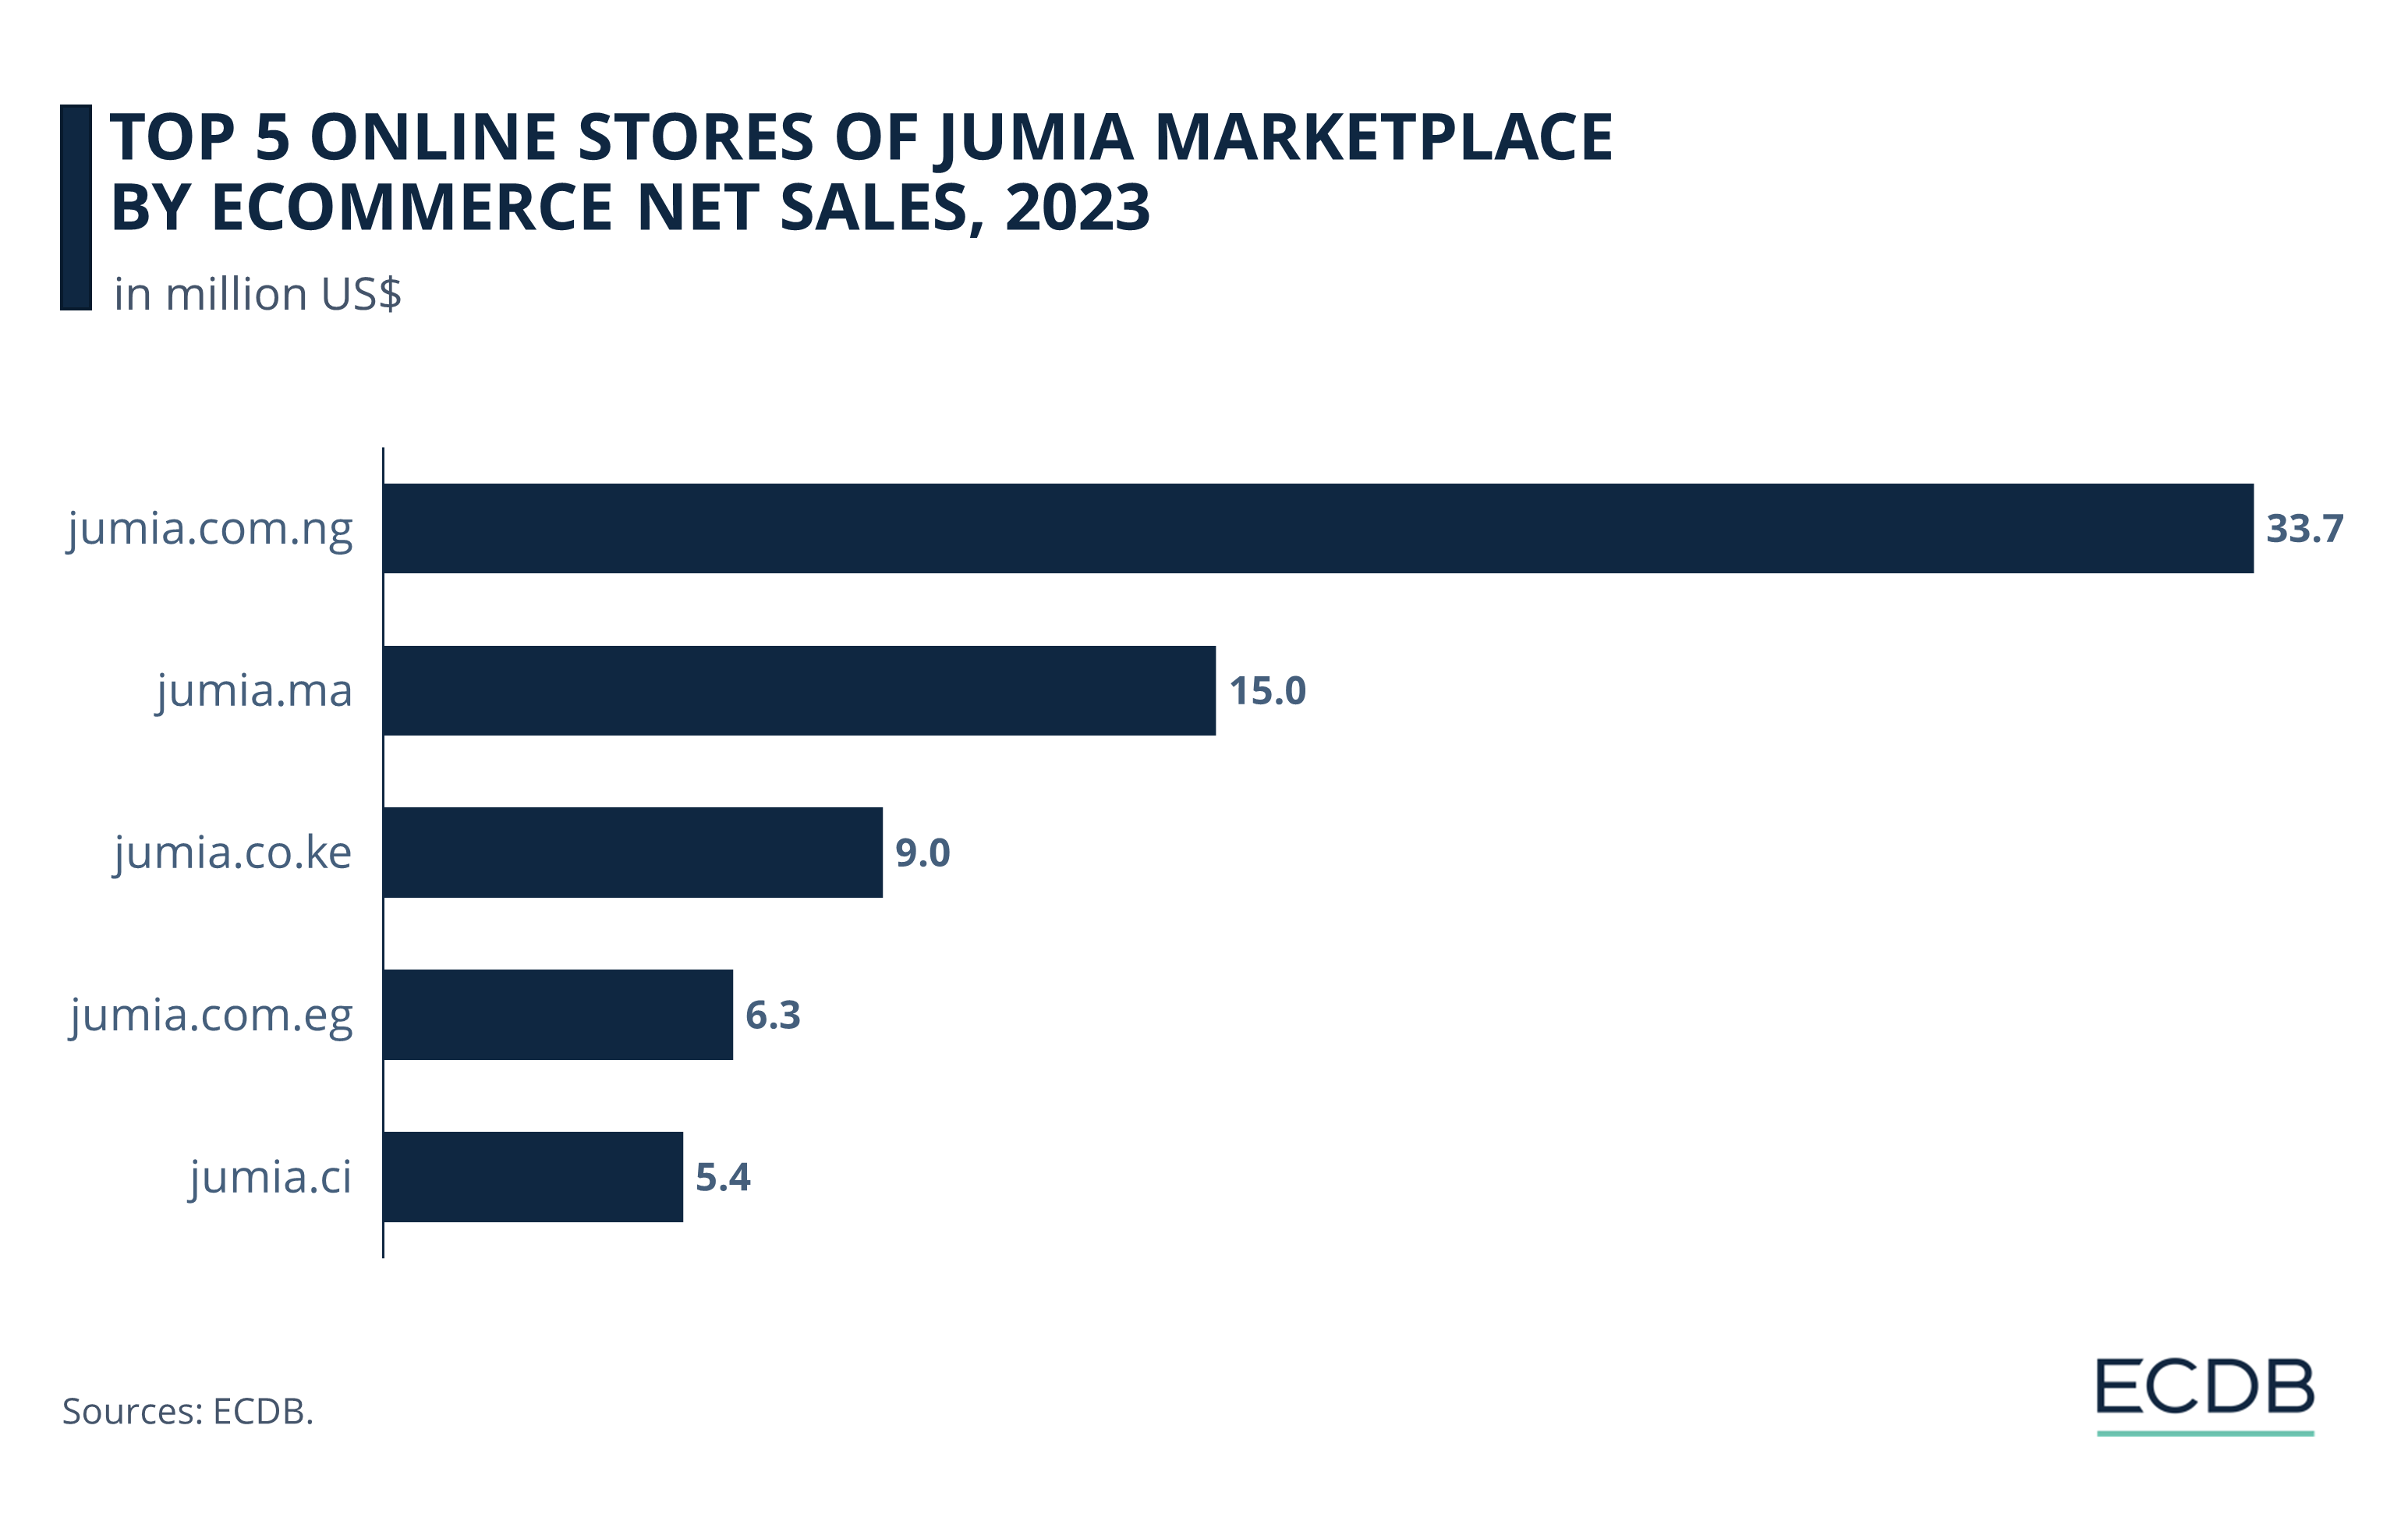 Top 5 Online Stores of Jumia Marketplace by eCommerce Net Sales, 2023